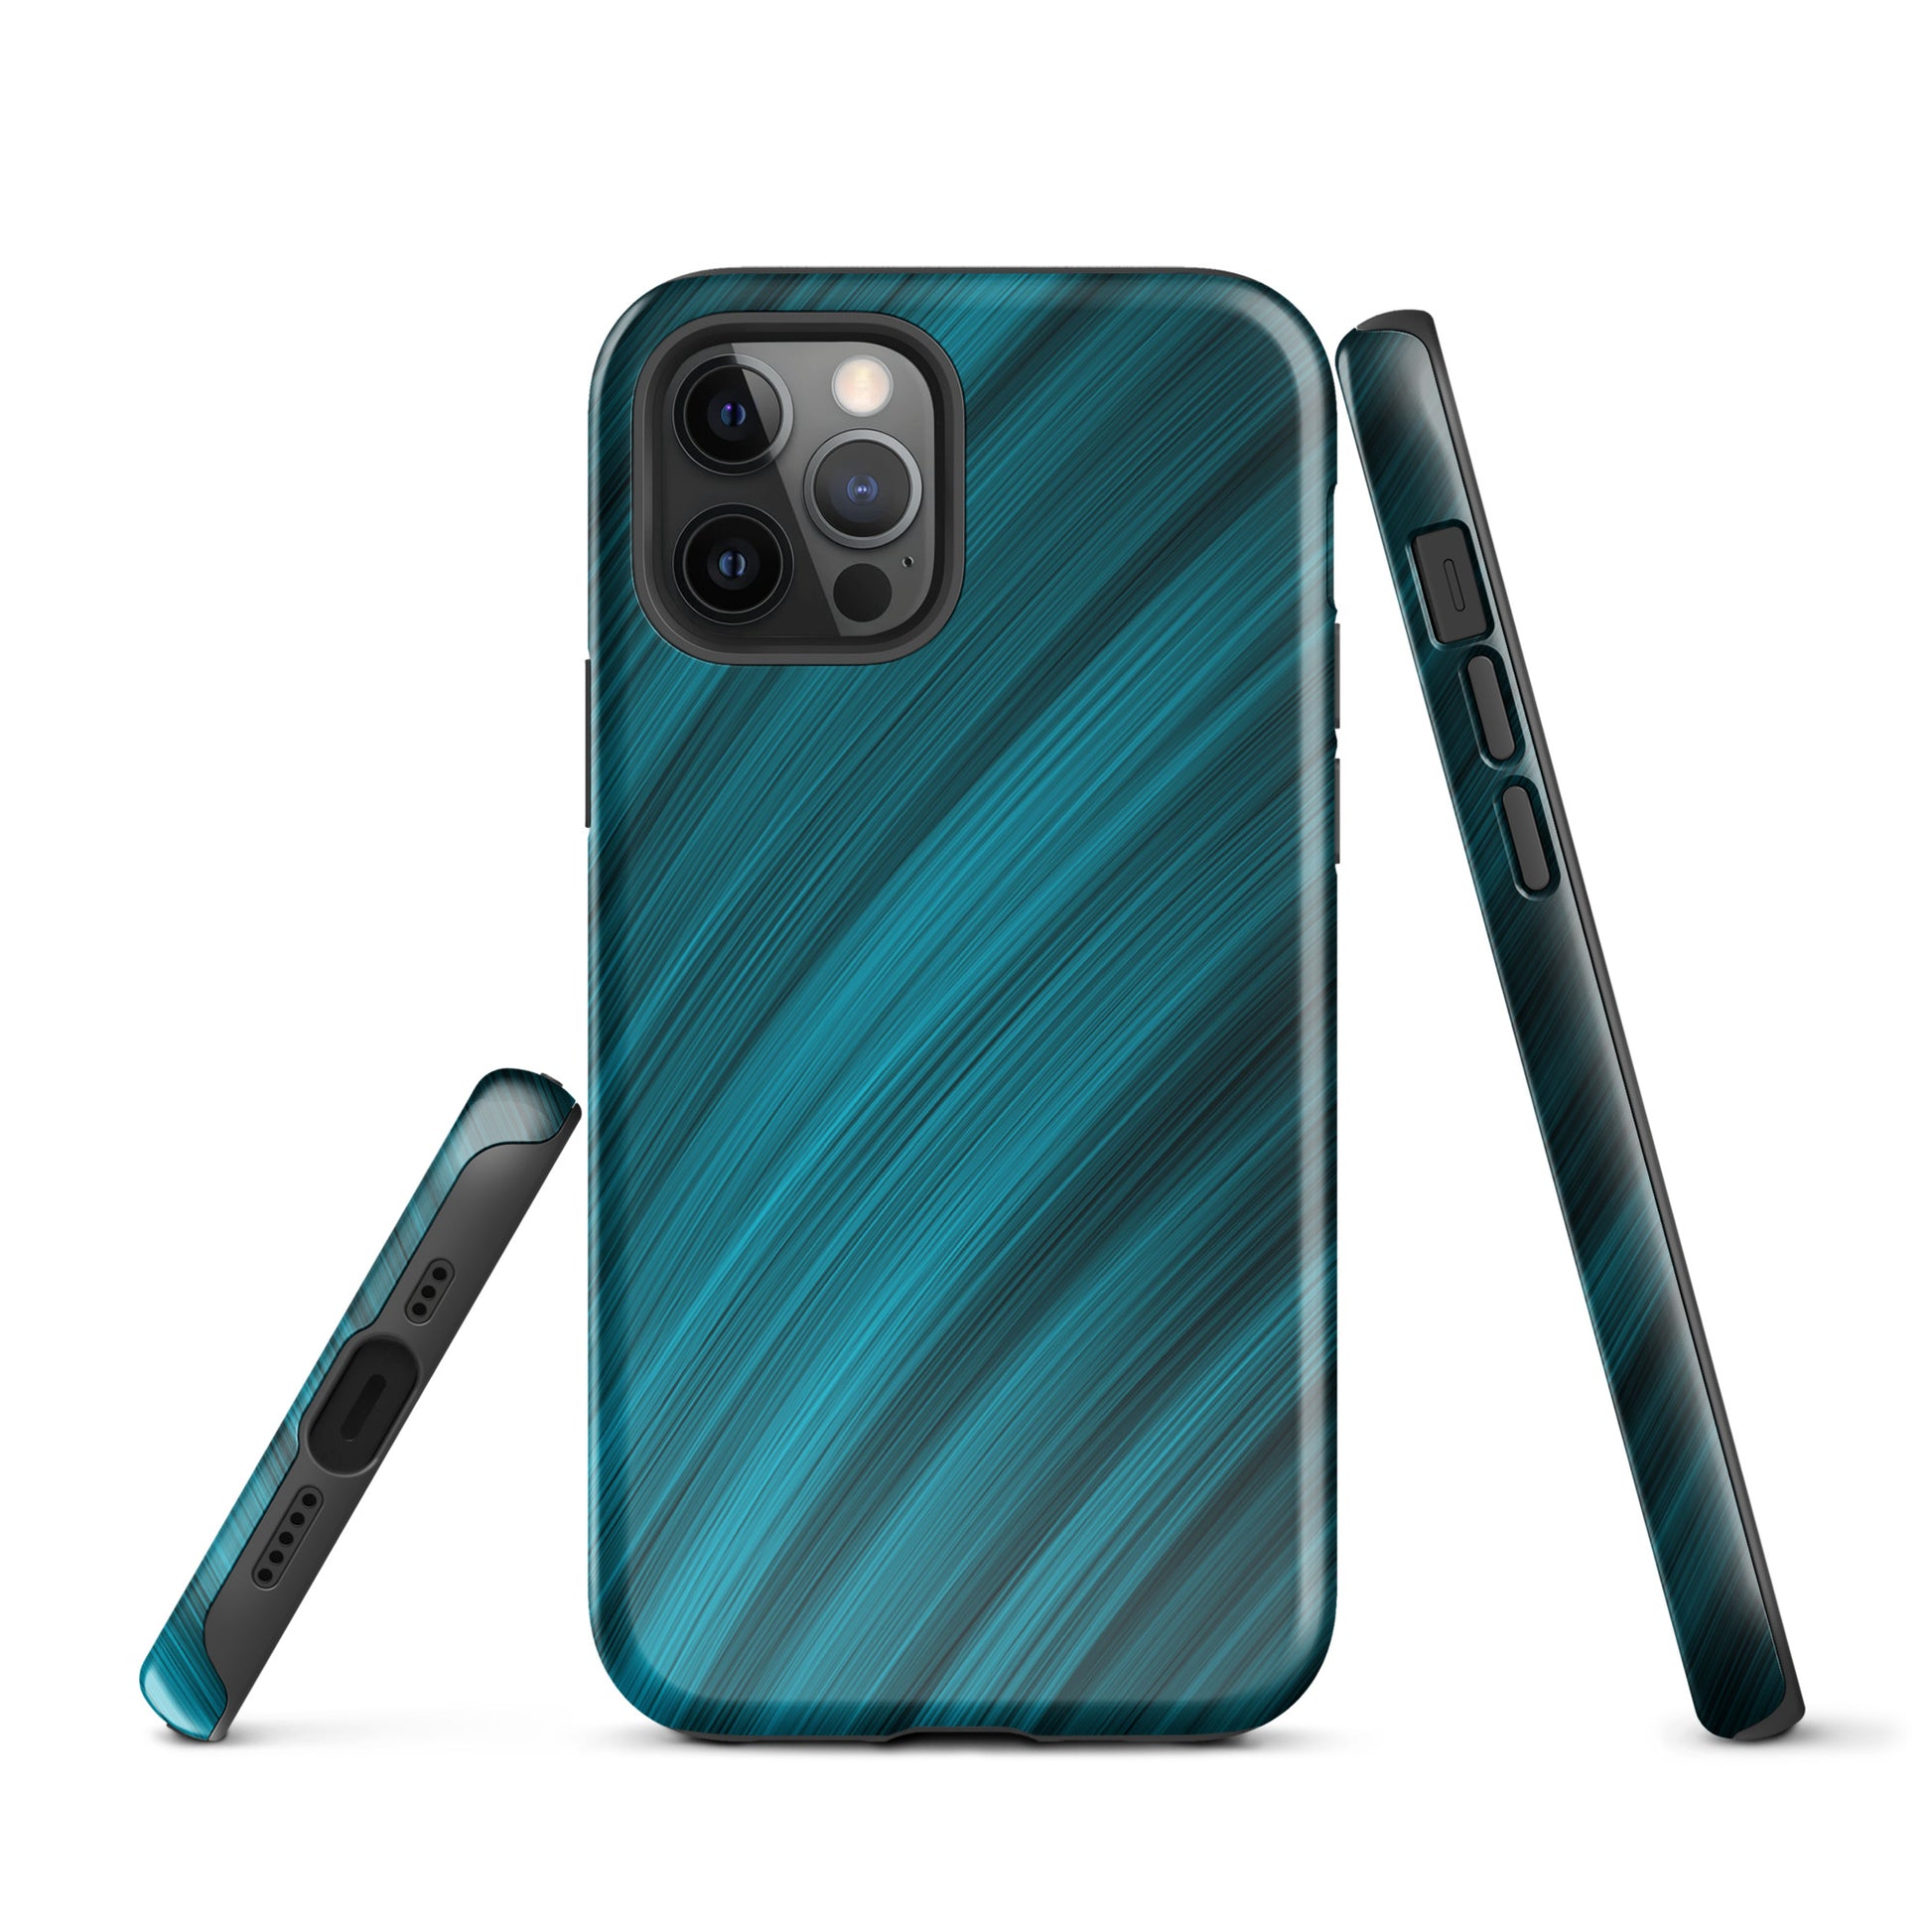 A Light Blue Brush Strokes Case for the iPhone 12 Pro